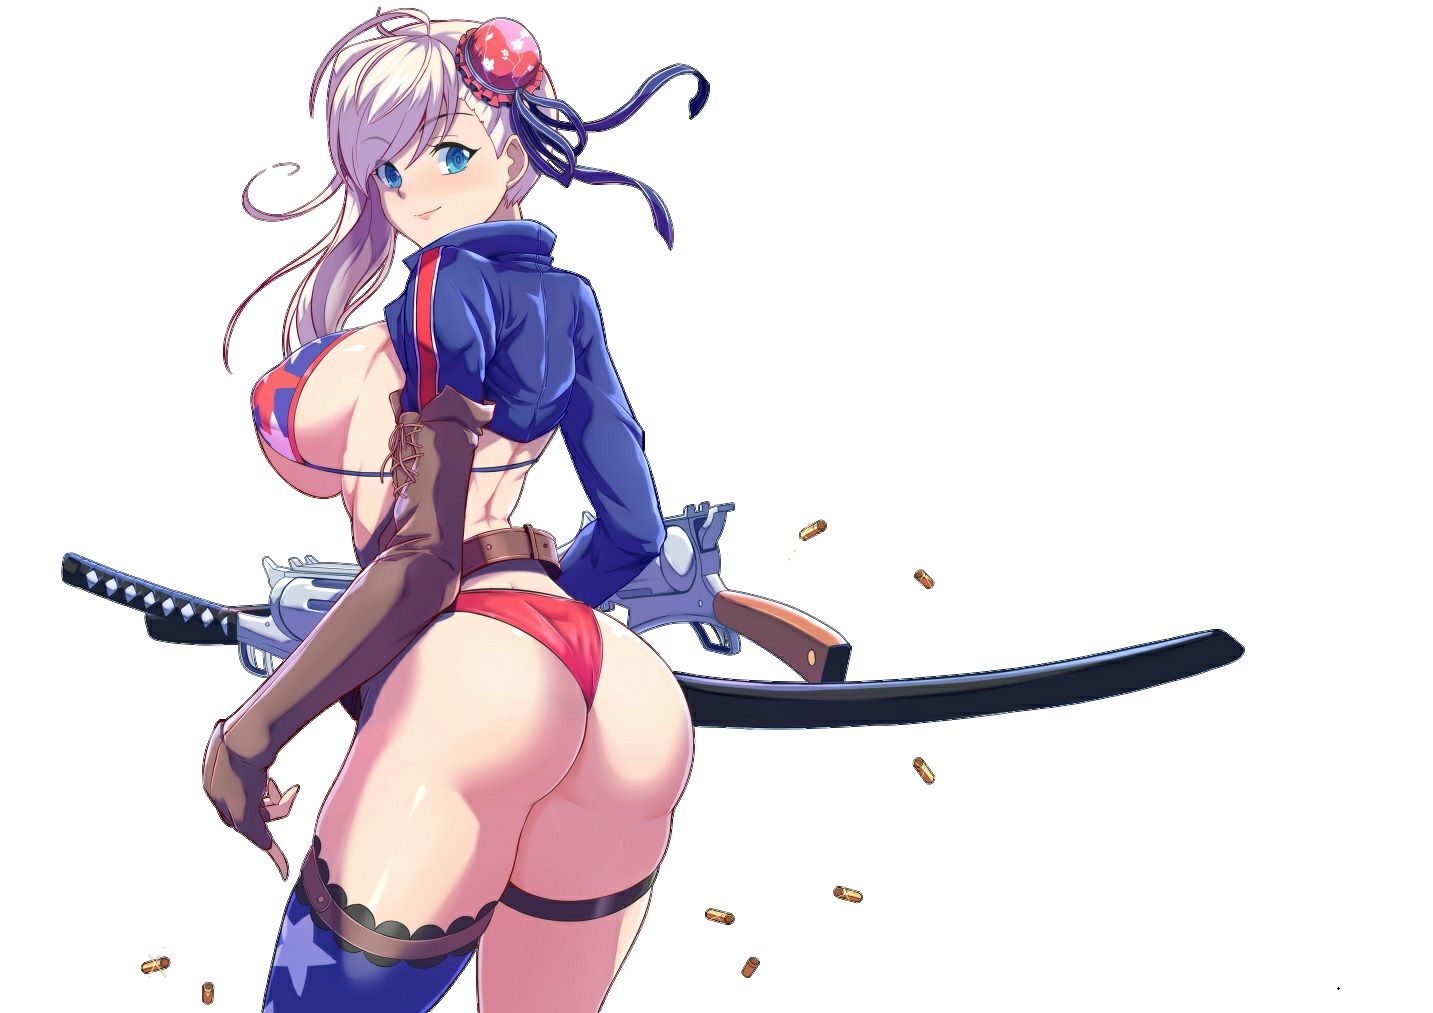 [Erotica character material] PNG background transmission erotic image such as anime character Part 315 51